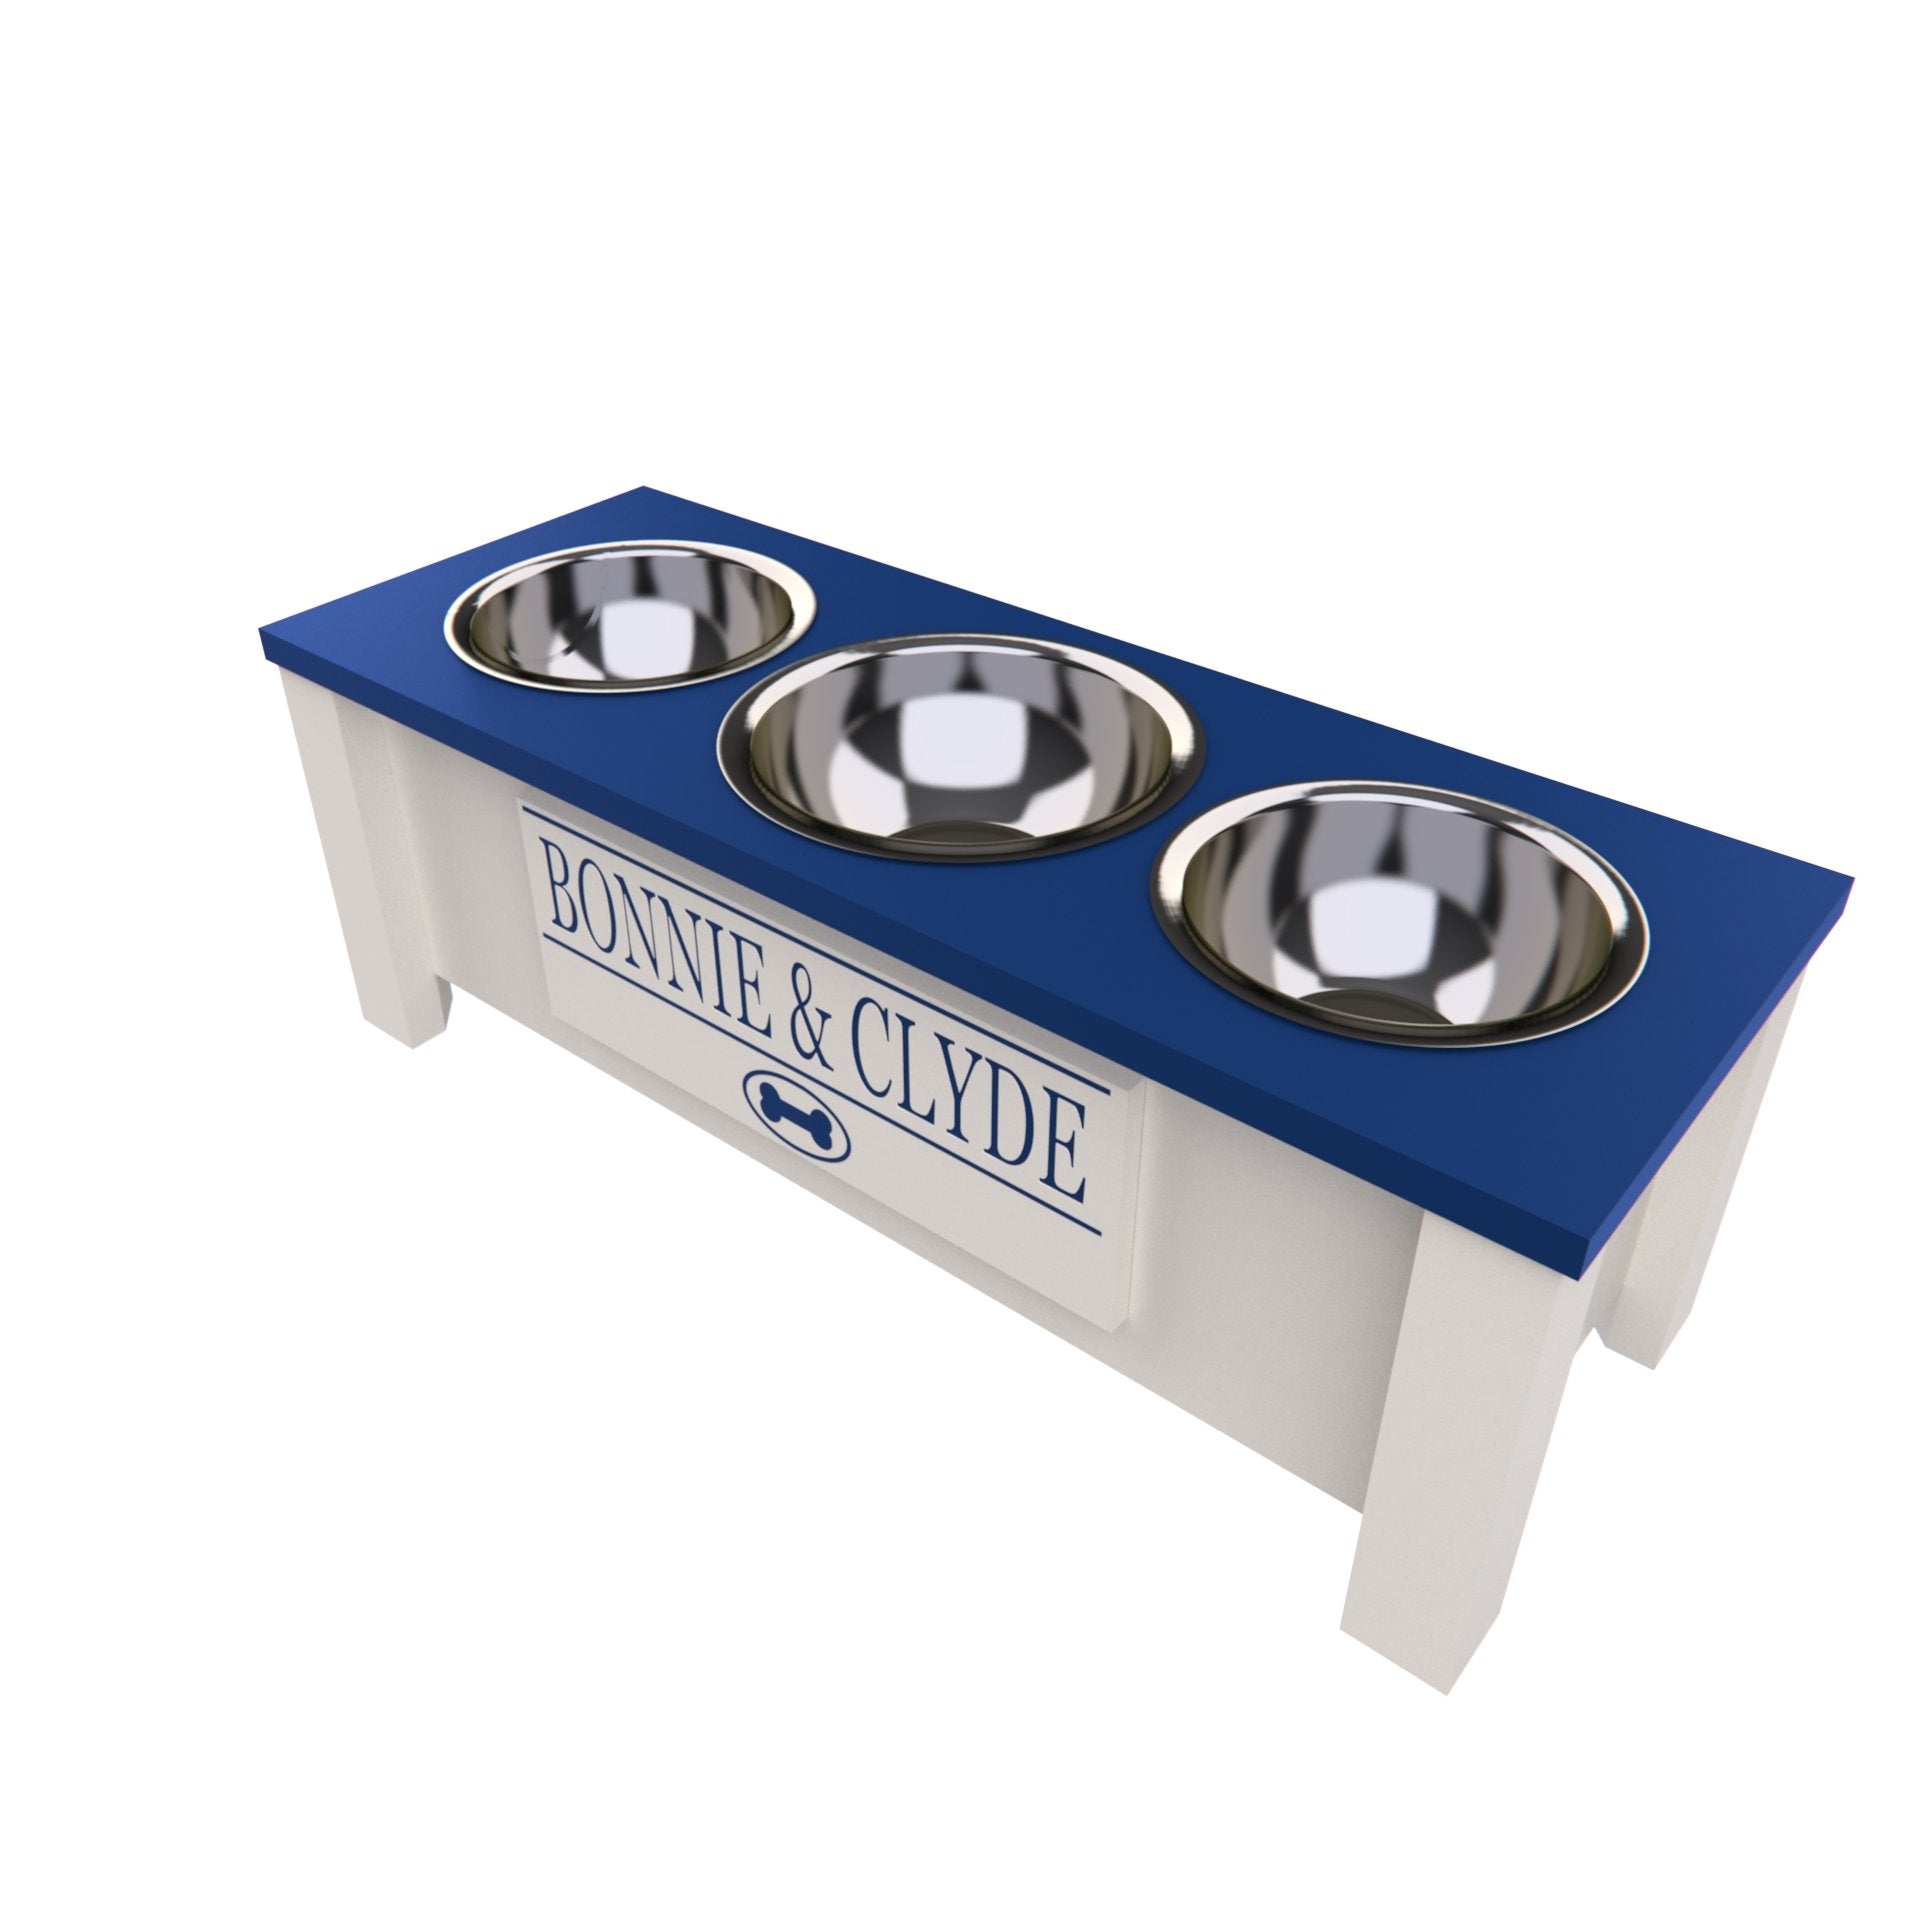 Personalized 3 Bowl Elevated Dog Feeder in Blue - GrooveThis Woodshop - GT006Blue-M